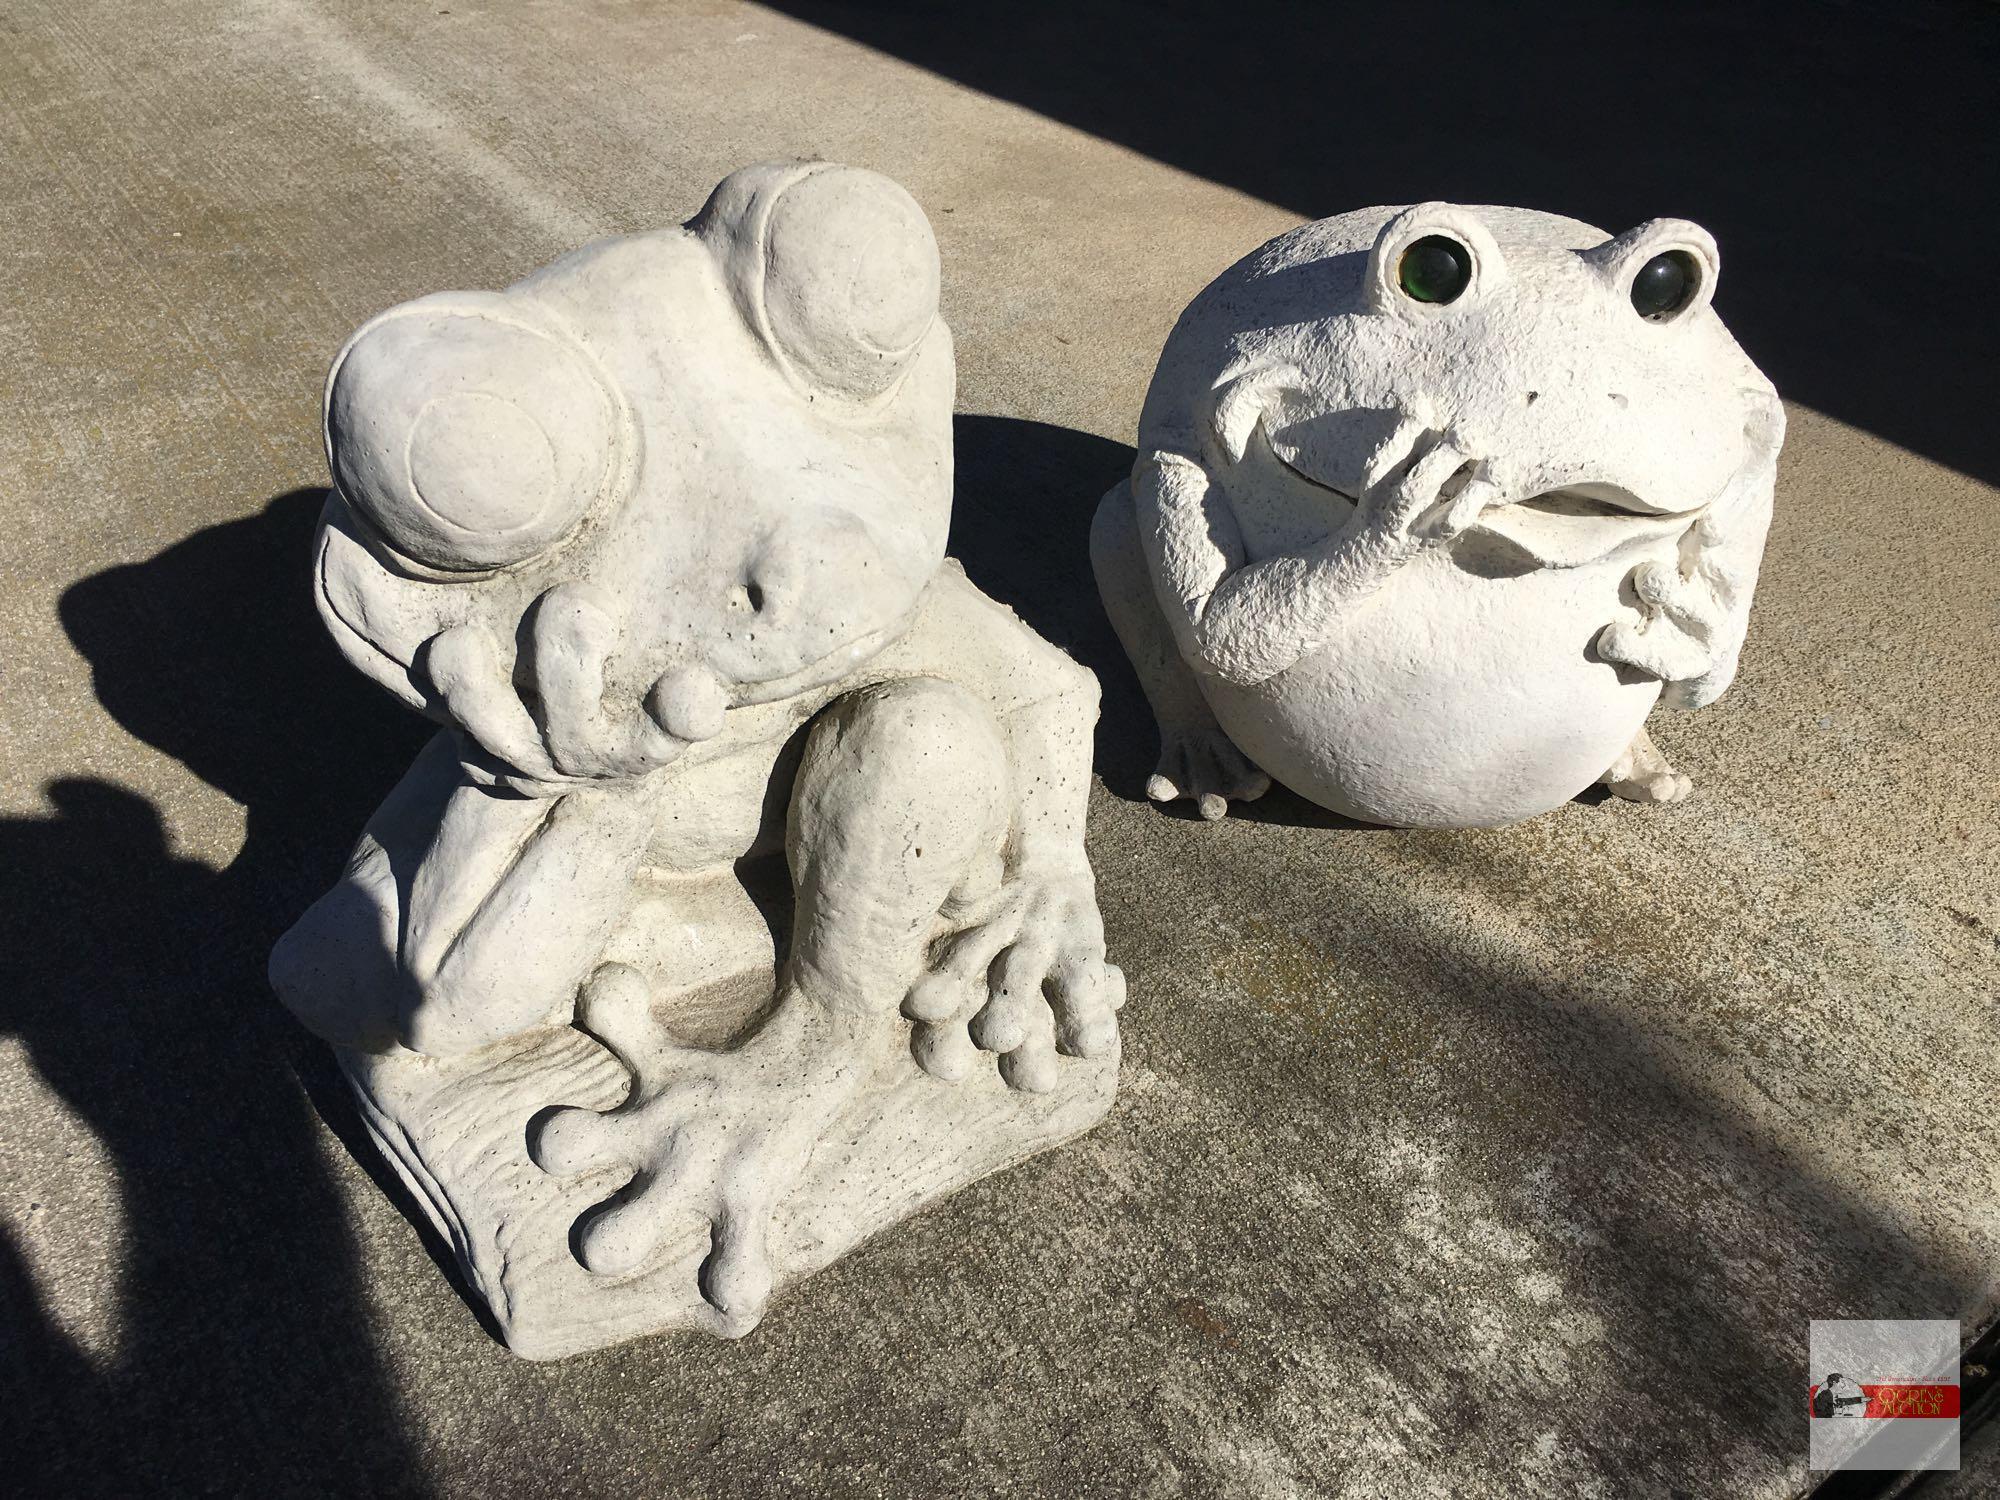 Yard & Garden - 2 - Cement tree frog statue 12"hx11"w & resin bull frog 9.5"wx10"h, (1 foot as is)